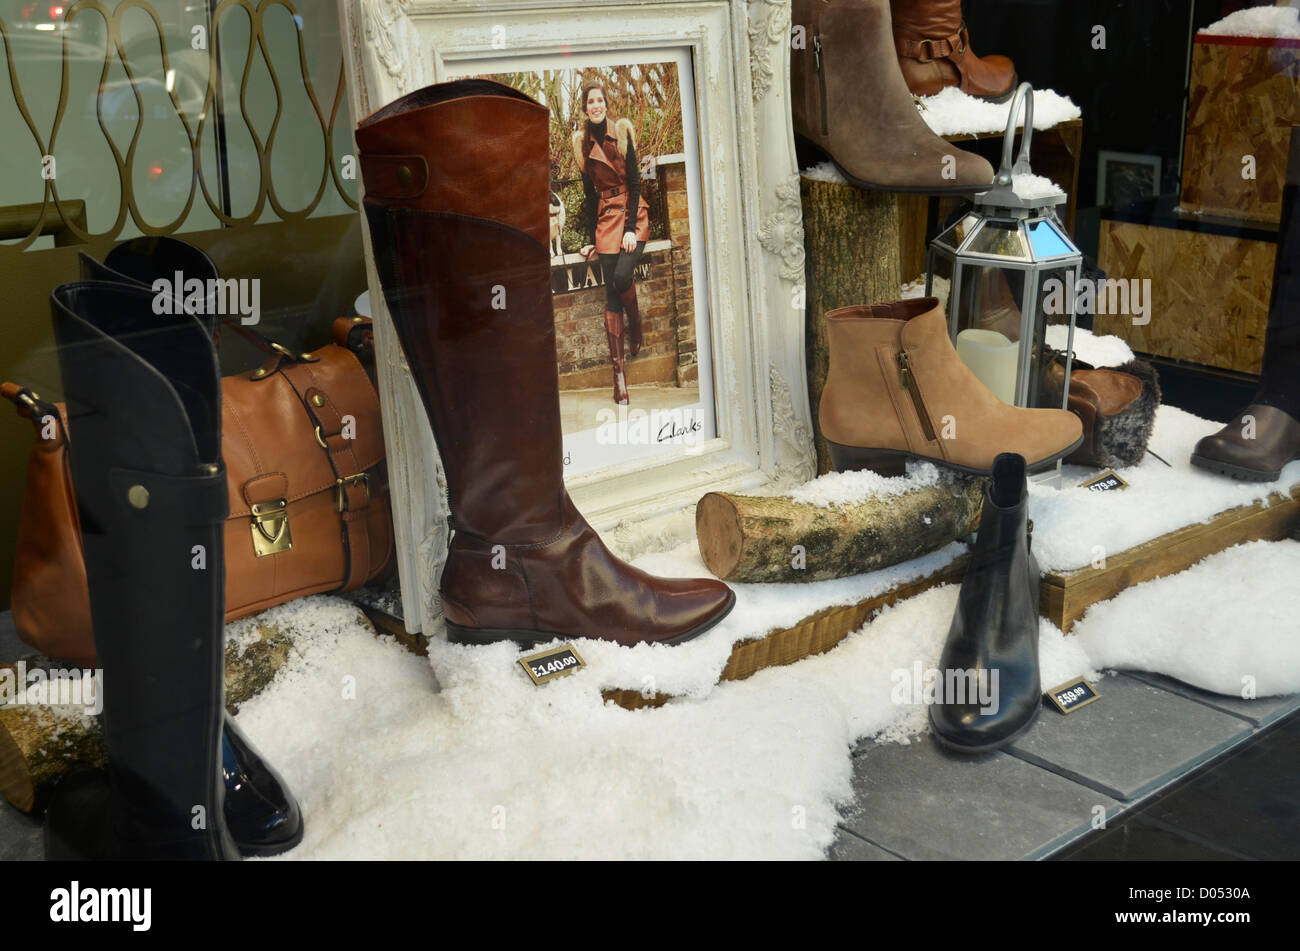 Clarks shoe store window display showing winter range of boots and shoes Photo - Alamy